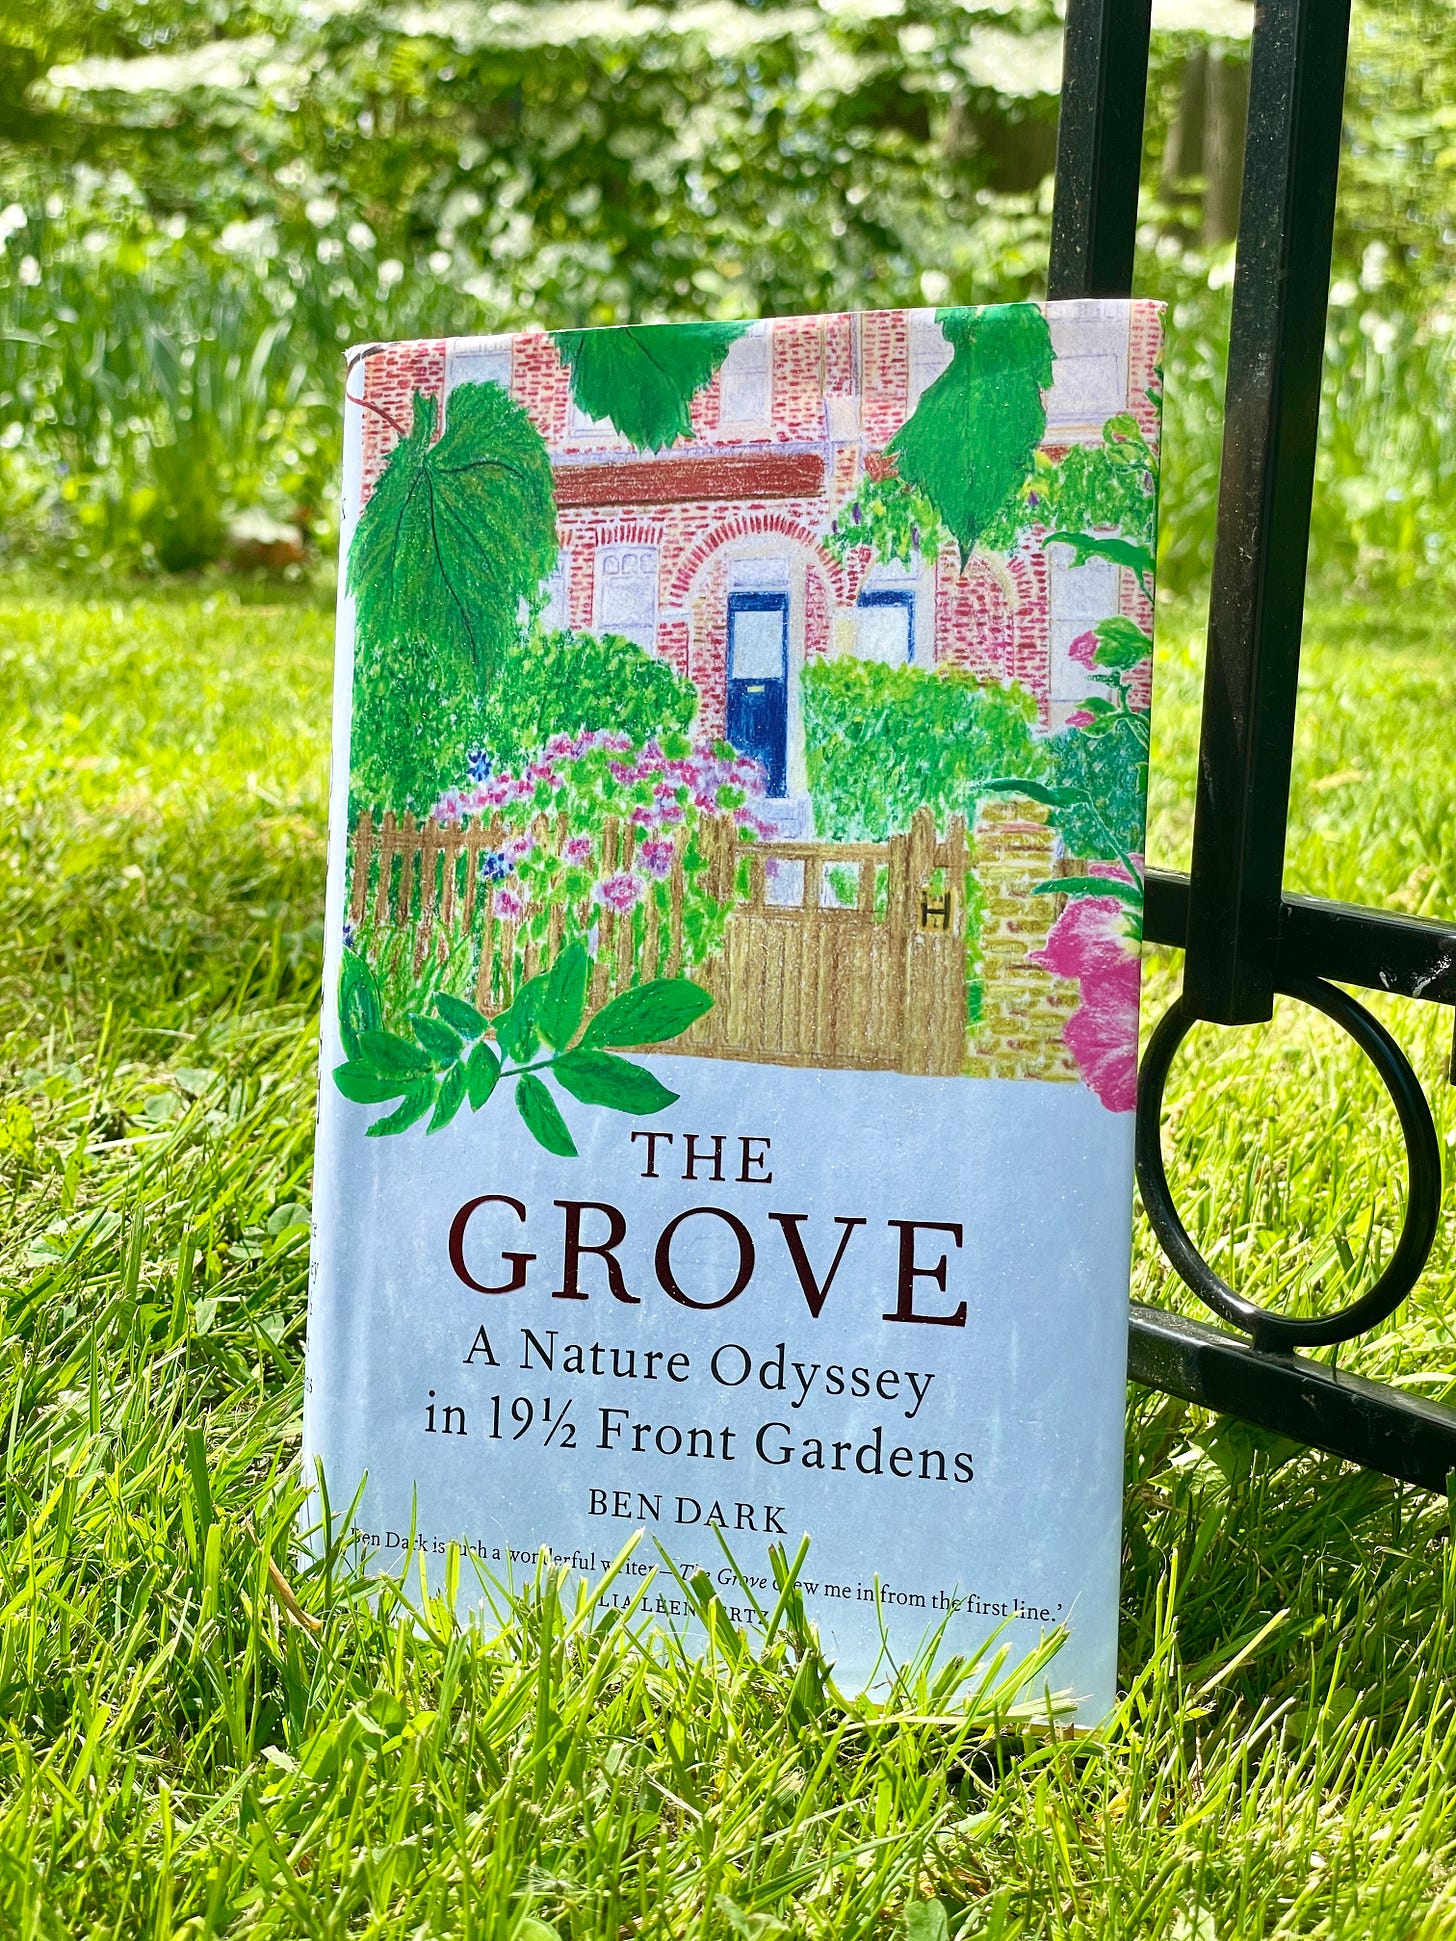 The Grove by Ben Dark in our Daffodil Dell this week. 